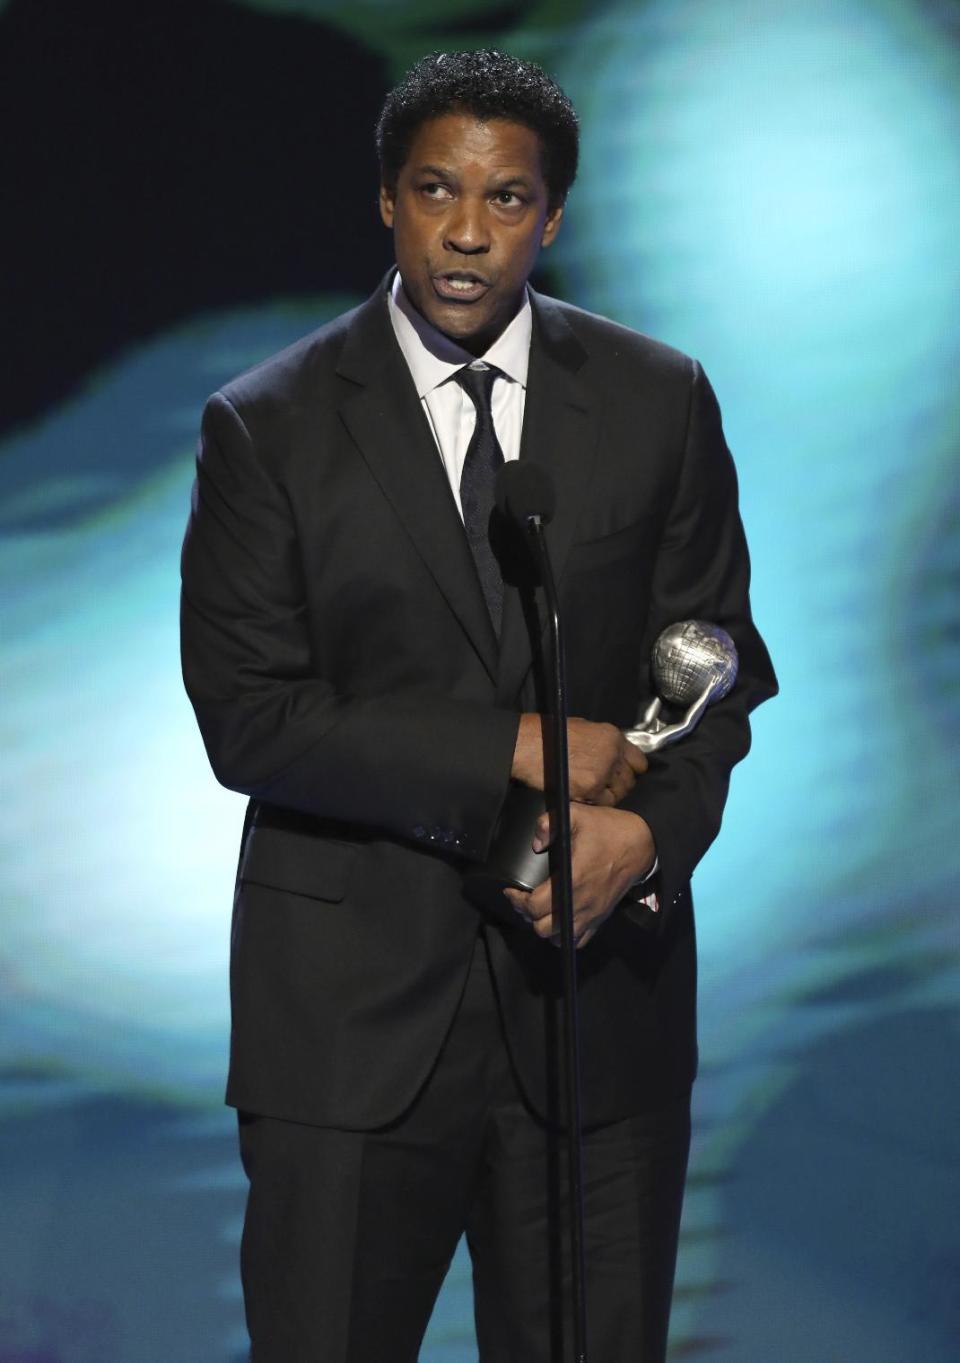 Denzel Washington accepts the award for outstanding actor in a motion picture for "Fences" at the 48th annual NAACP Image Awards at the Pasadena Civic Auditorium on Saturday, Feb. 11, 2017, in Pasadena, Calif. (Photo by Matt Sayles/Invision/AP)